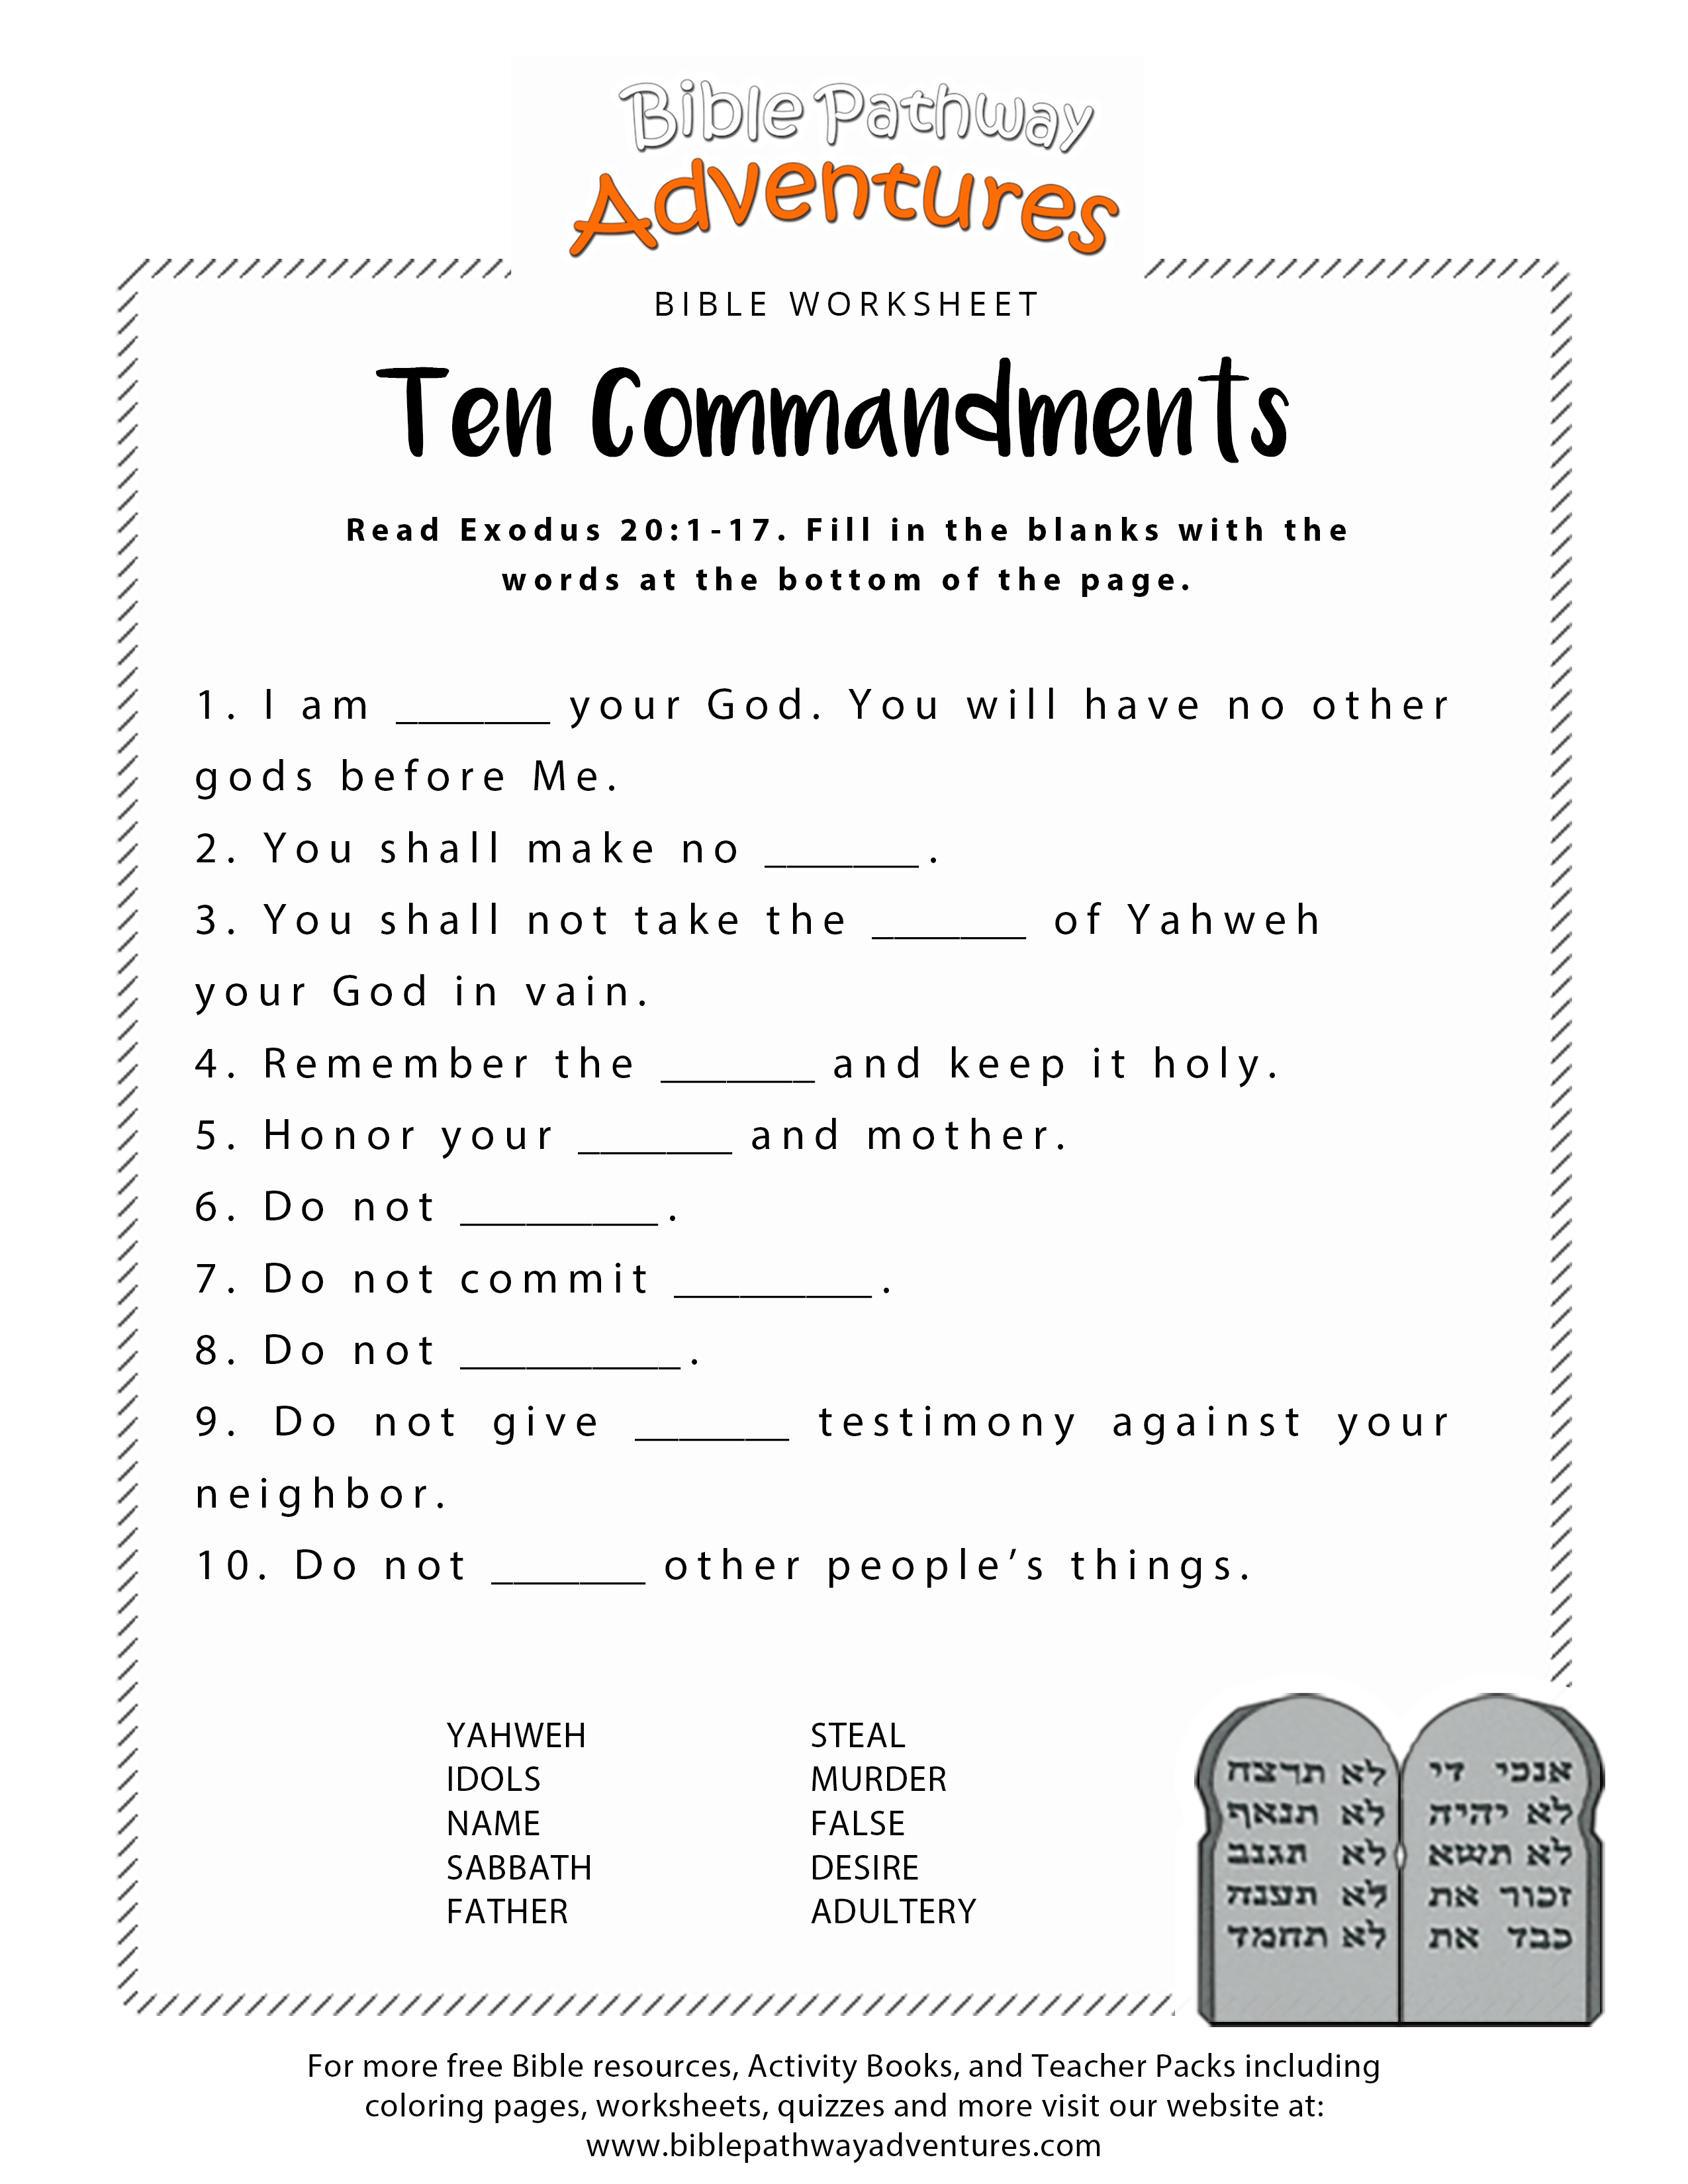 Free Printable Bible Worksheets For Youth – Worksheet Template - Free Printable Sunday School Lessons For Youth